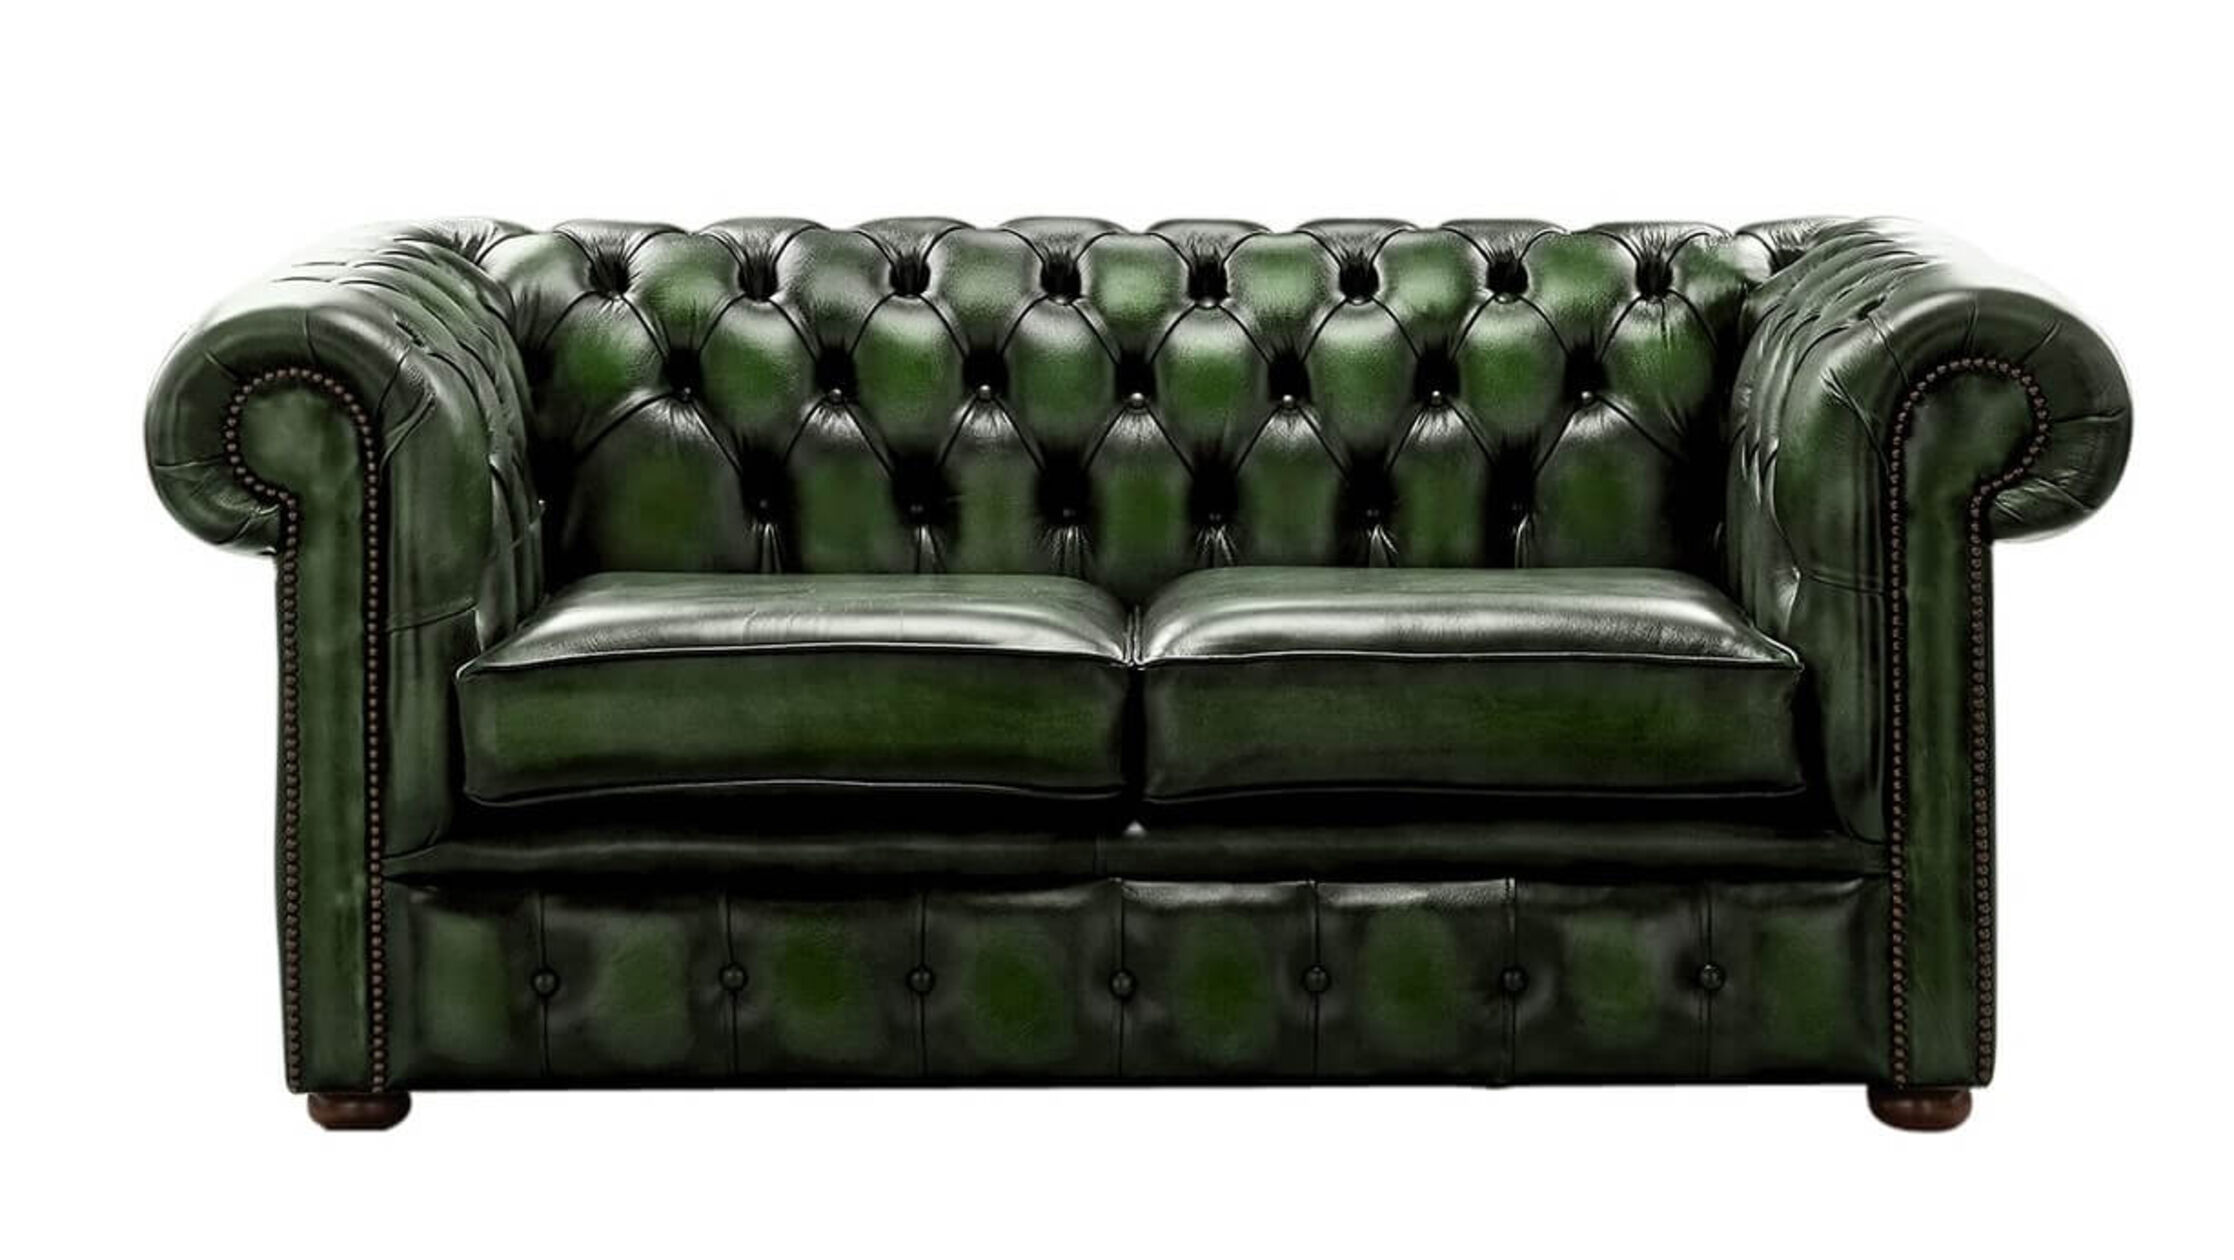 Chesterfield 2 Seater Sofa Settee, Old Green Leather Sofa Bed